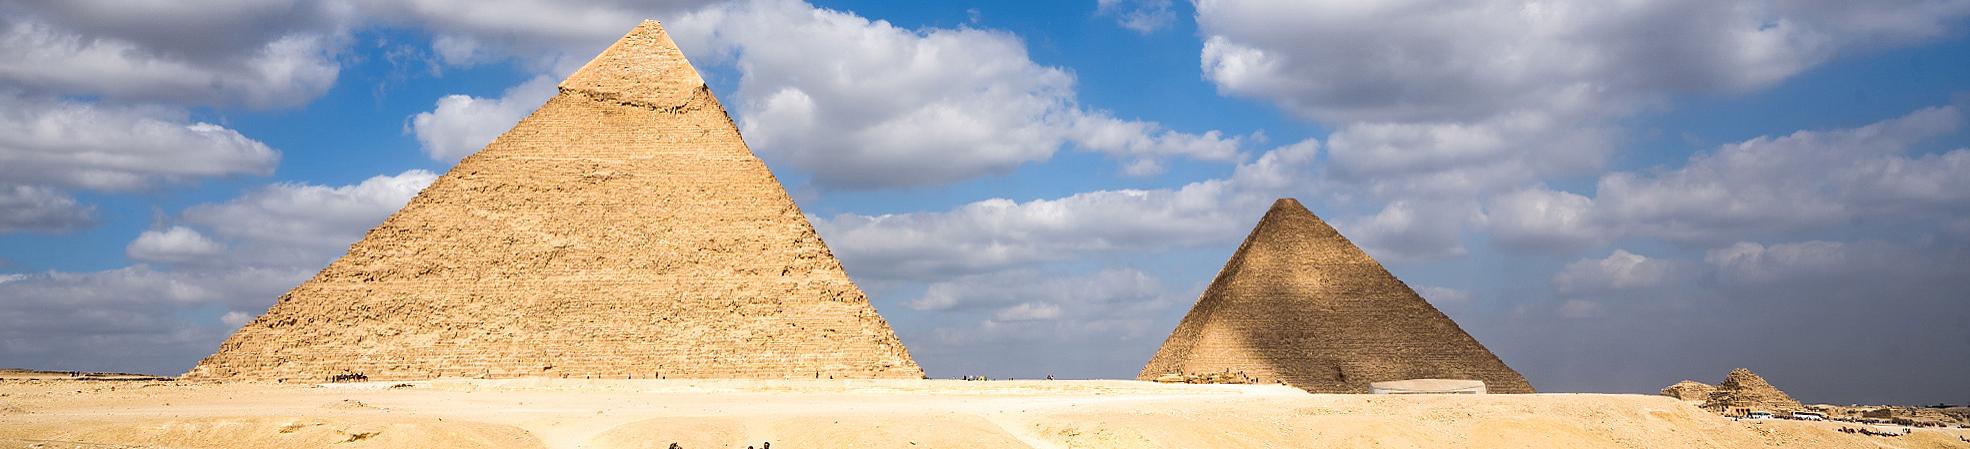 Know Before Going Inside the Pyramids of Giza